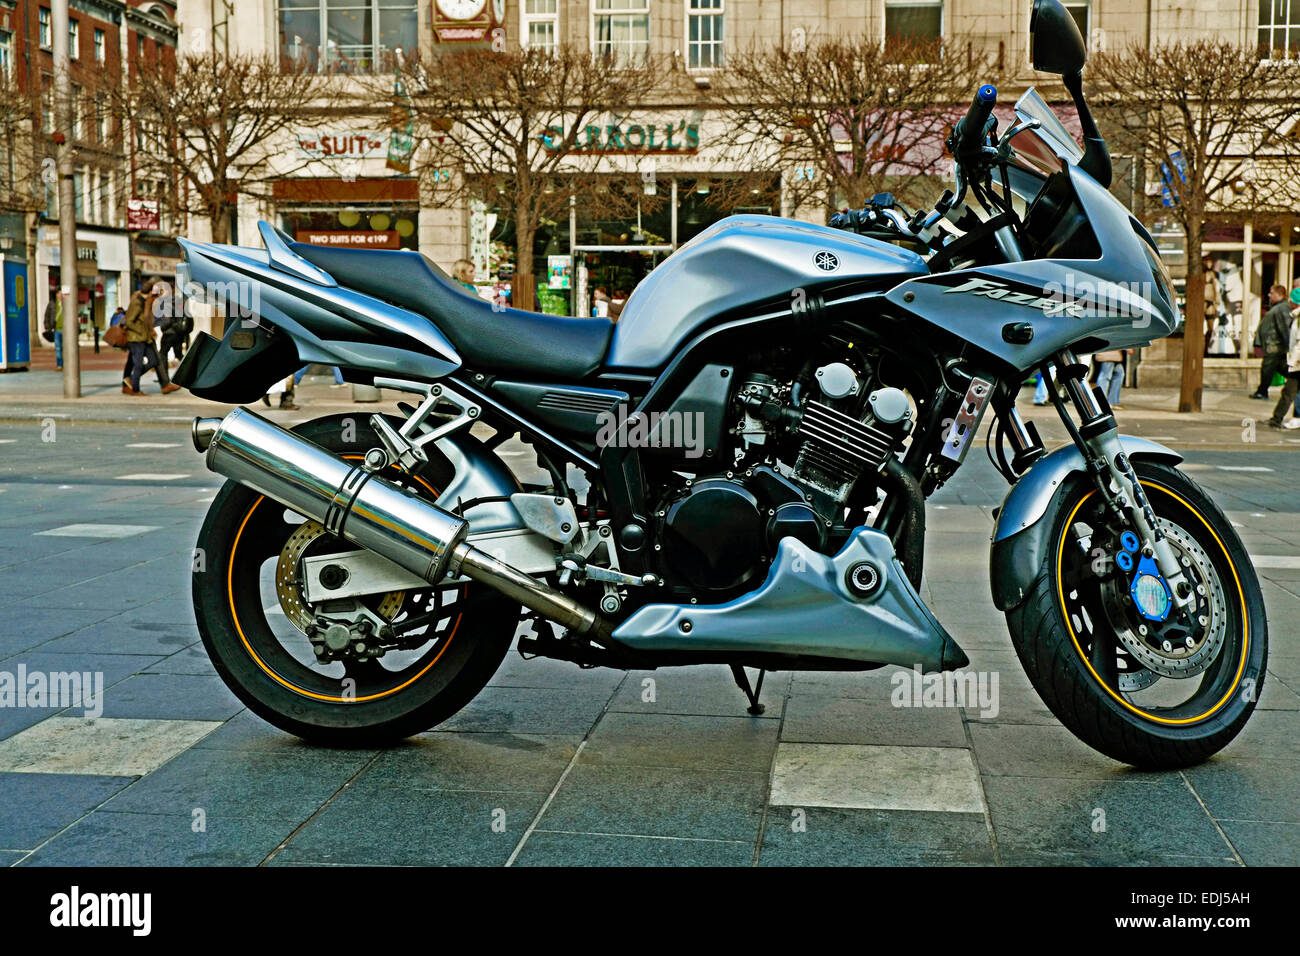 Yamaha Fazer 600cc Four Cylinder Japanese Motorcycle parked in O'Connell Street Dublin Ireland Stock Photo